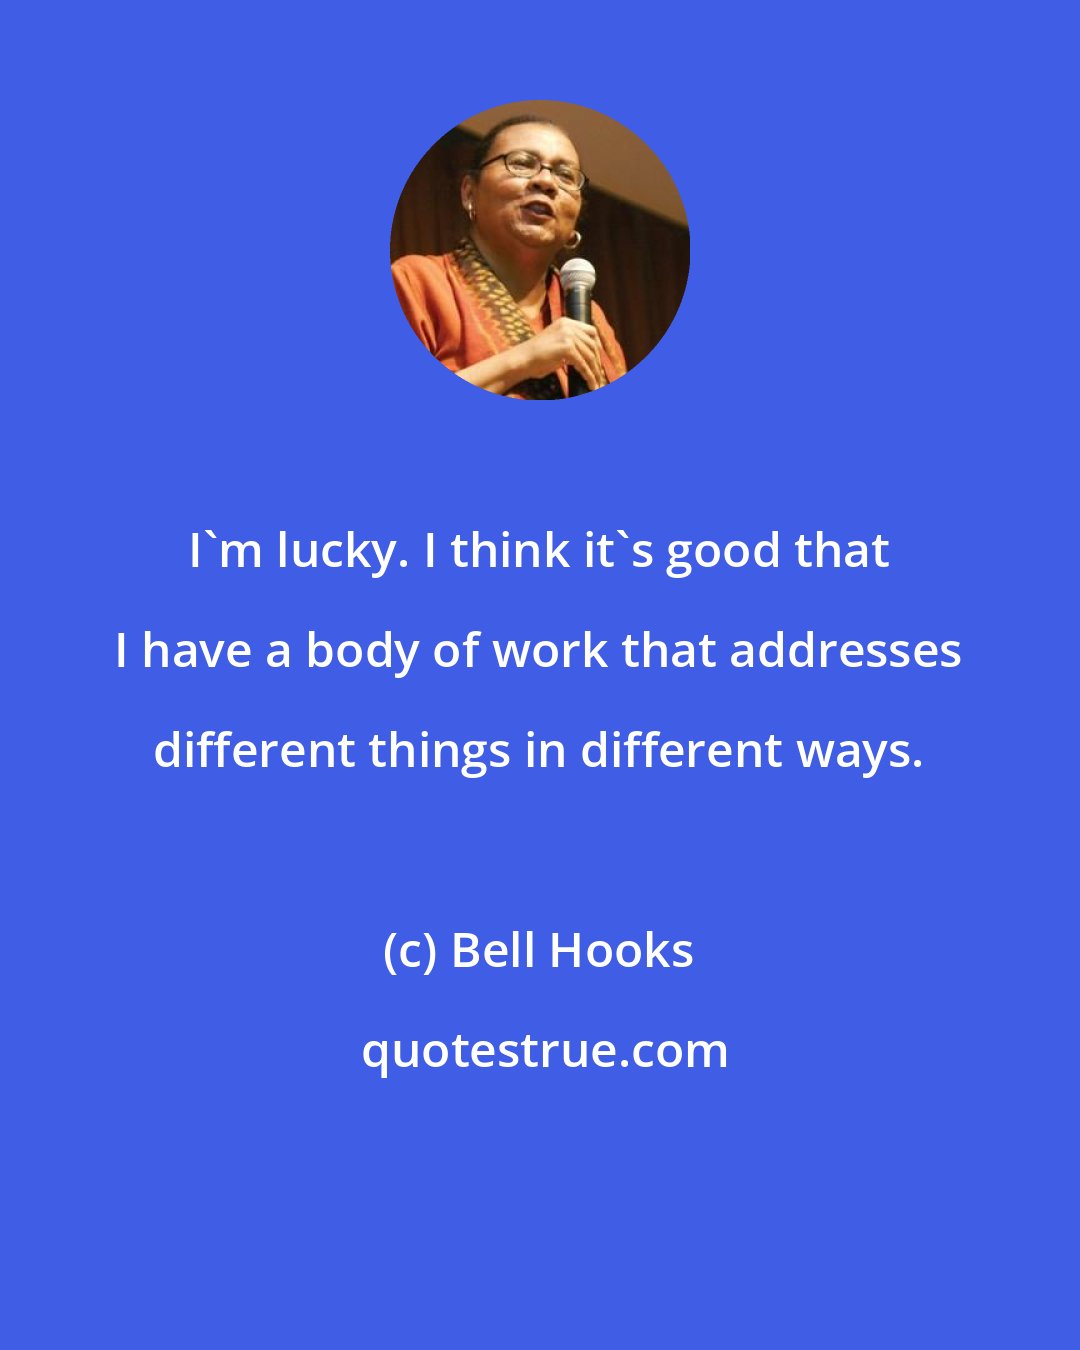 Bell Hooks: I'm lucky. I think it's good that I have a body of work that addresses different things in different ways.